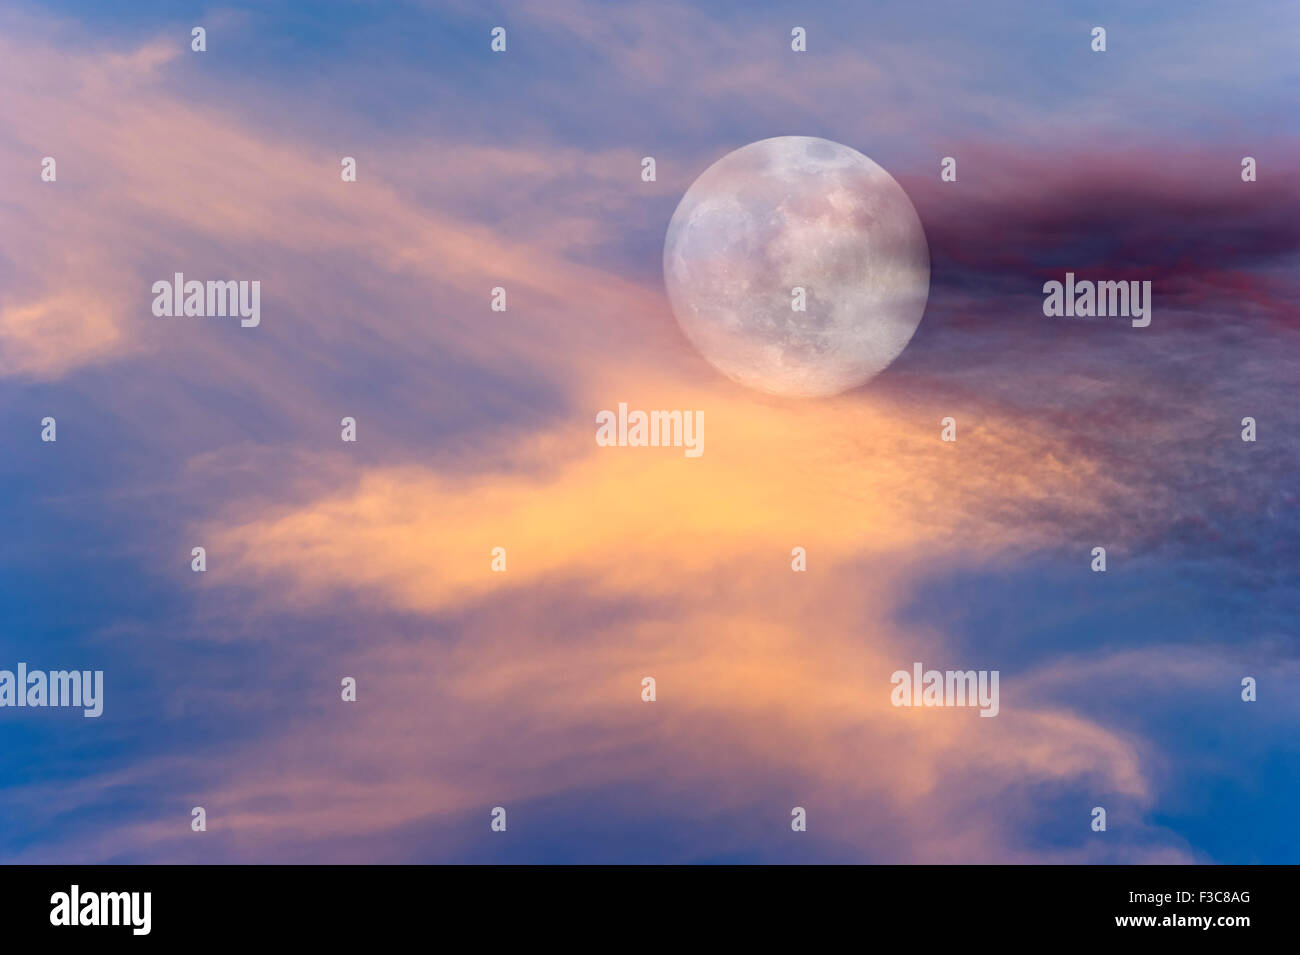 Moon clouds skies is a vibrant surreal scenic of a full moon rising amongst the colorful cloudscape. Stock Photo